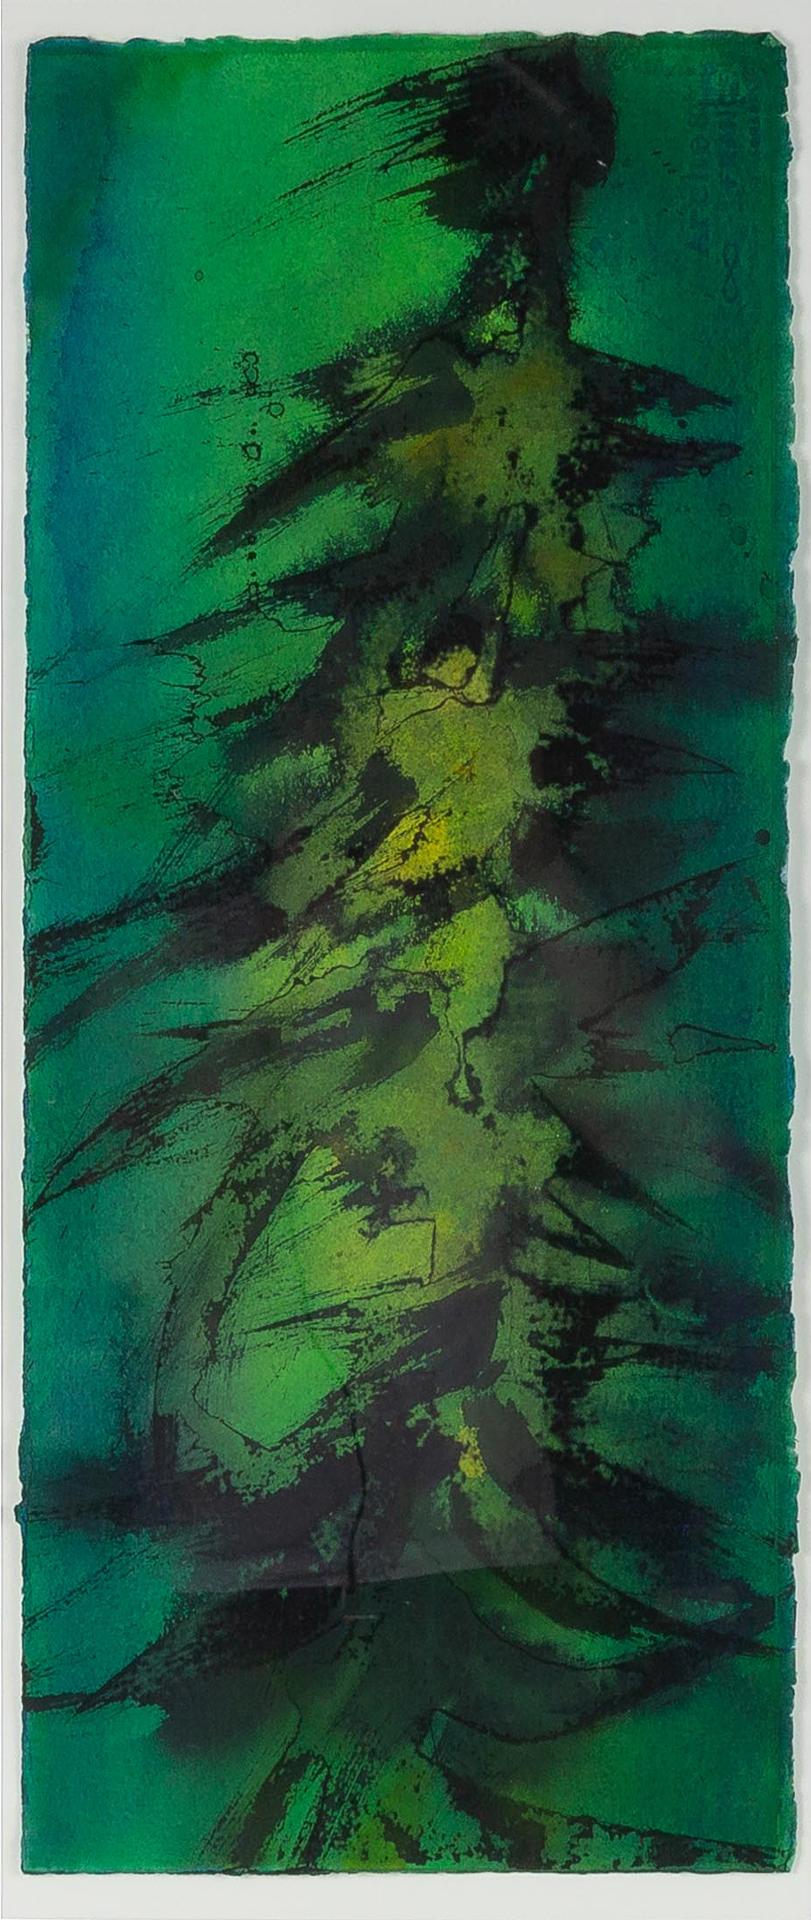 Donald Alvin Jarvis (1923-2001) - GREEN, 1997